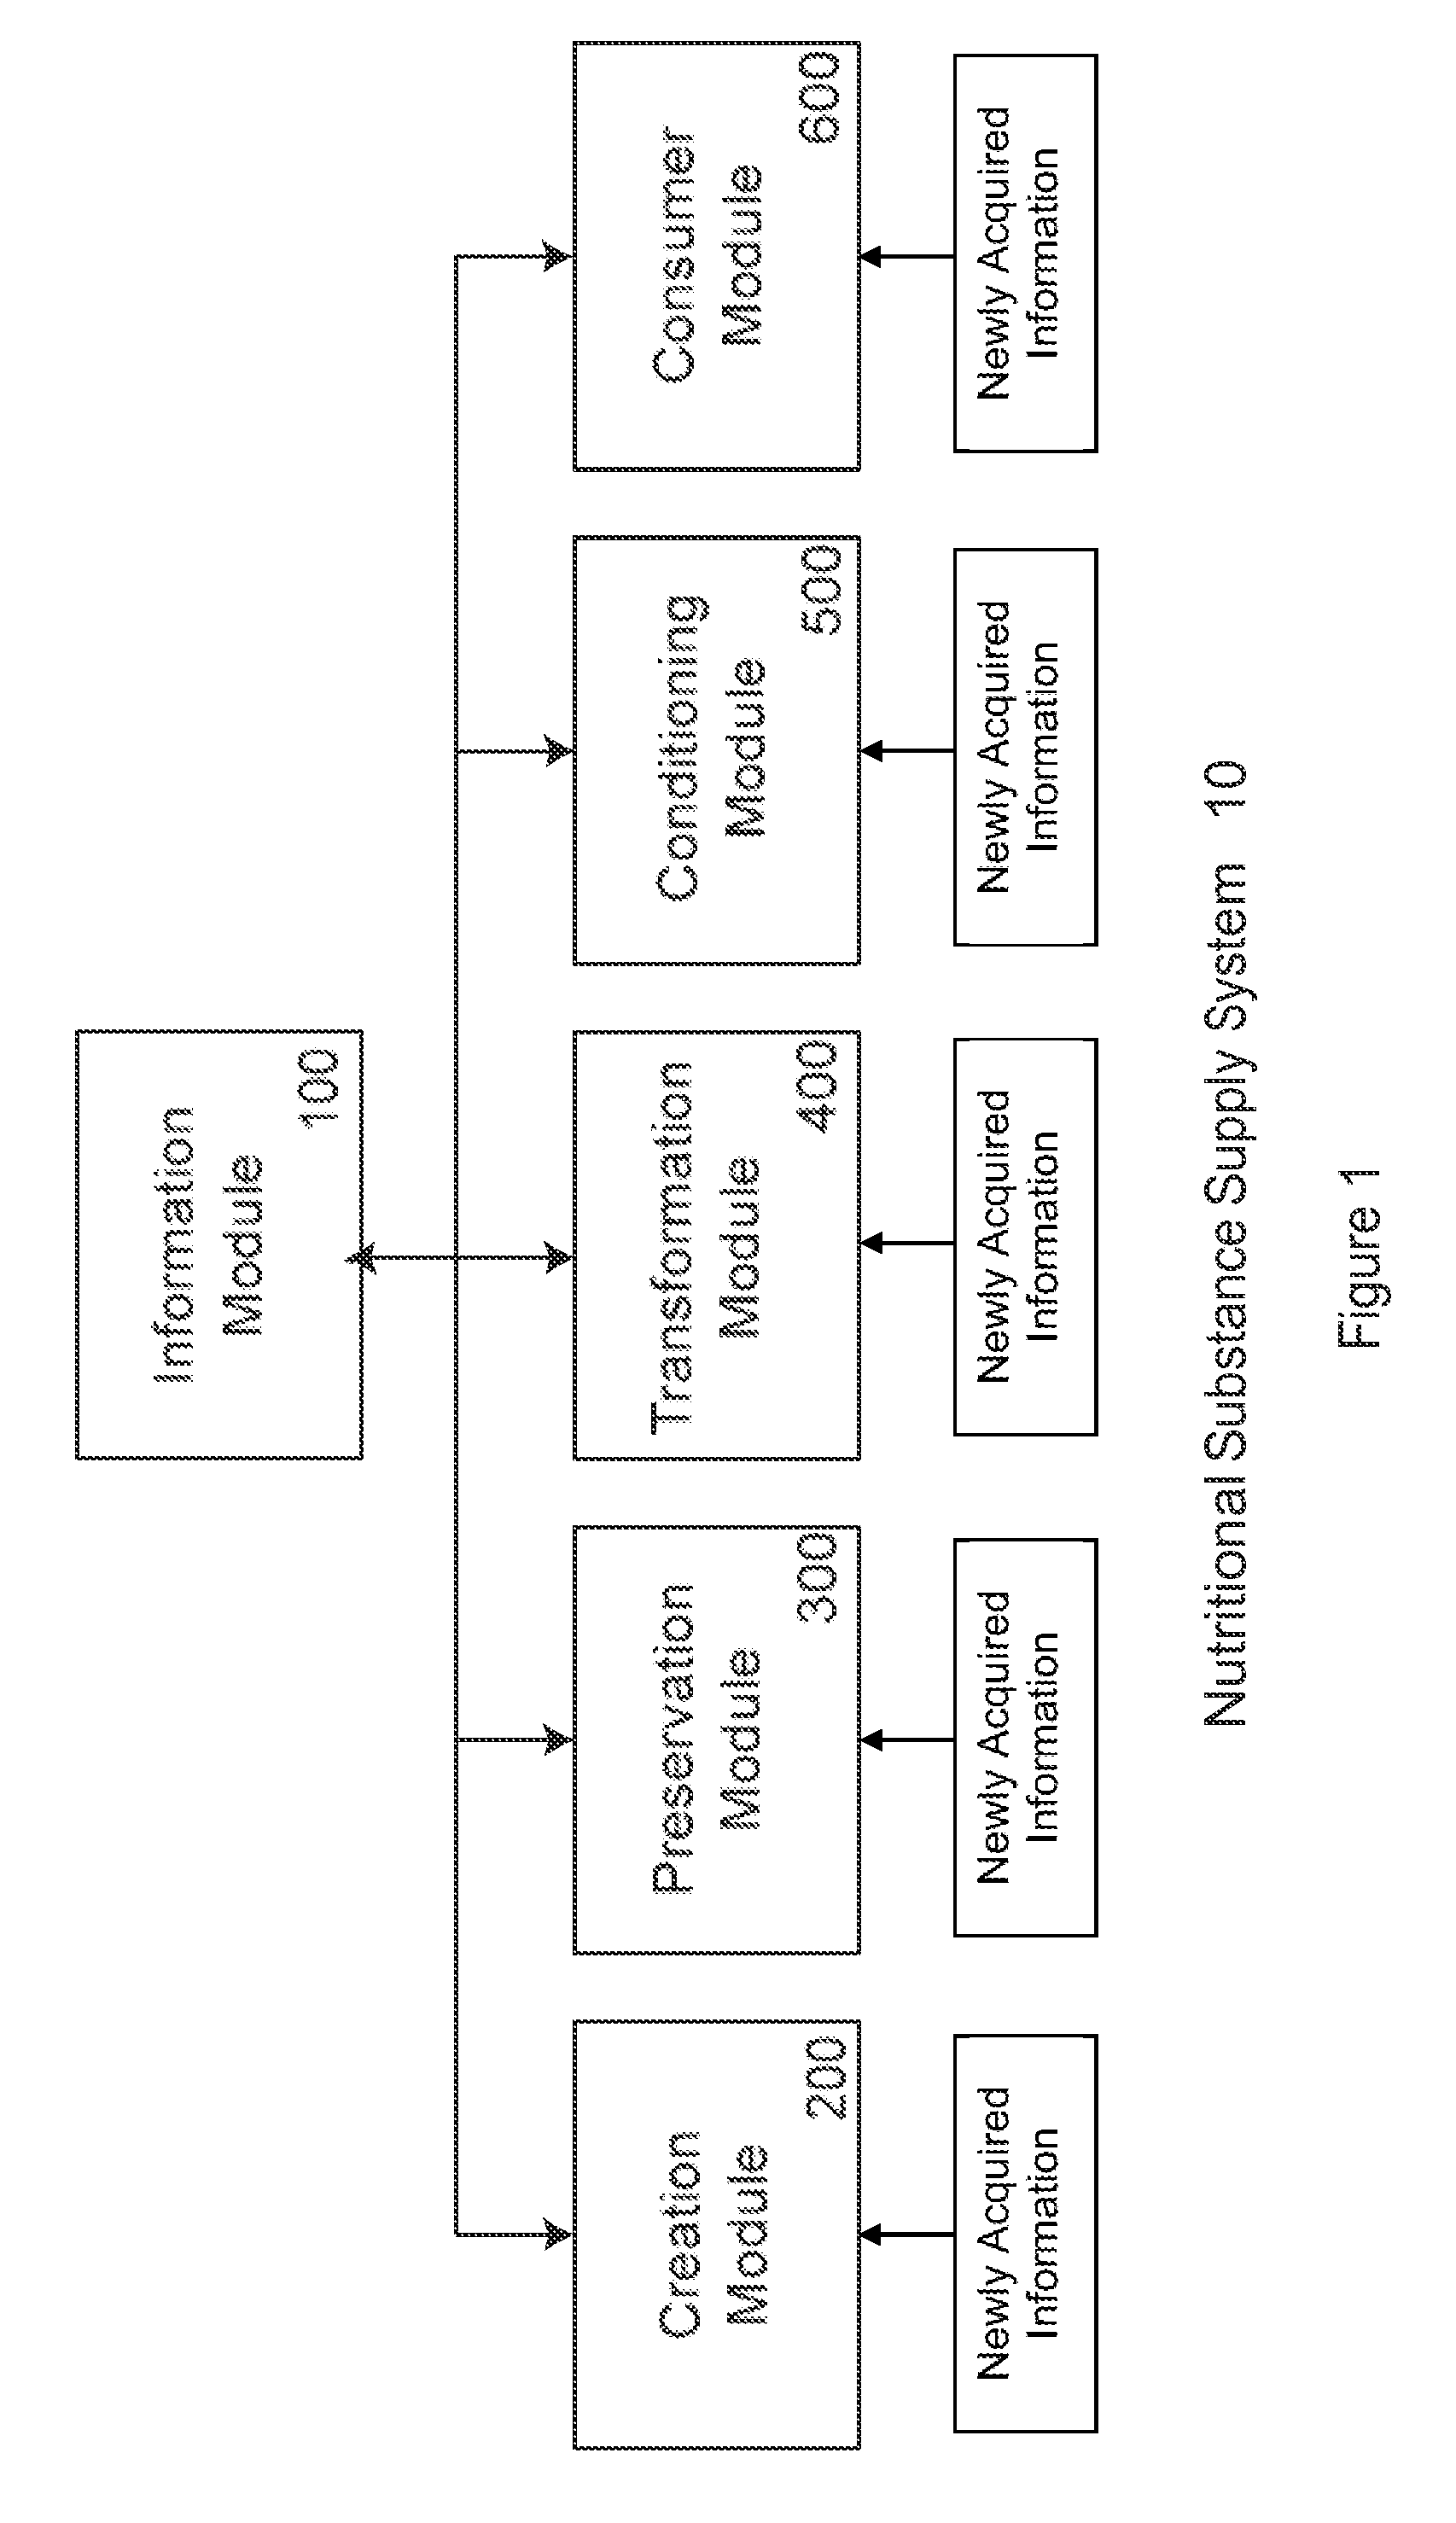 Appliances with weight sensors for nutritional substances